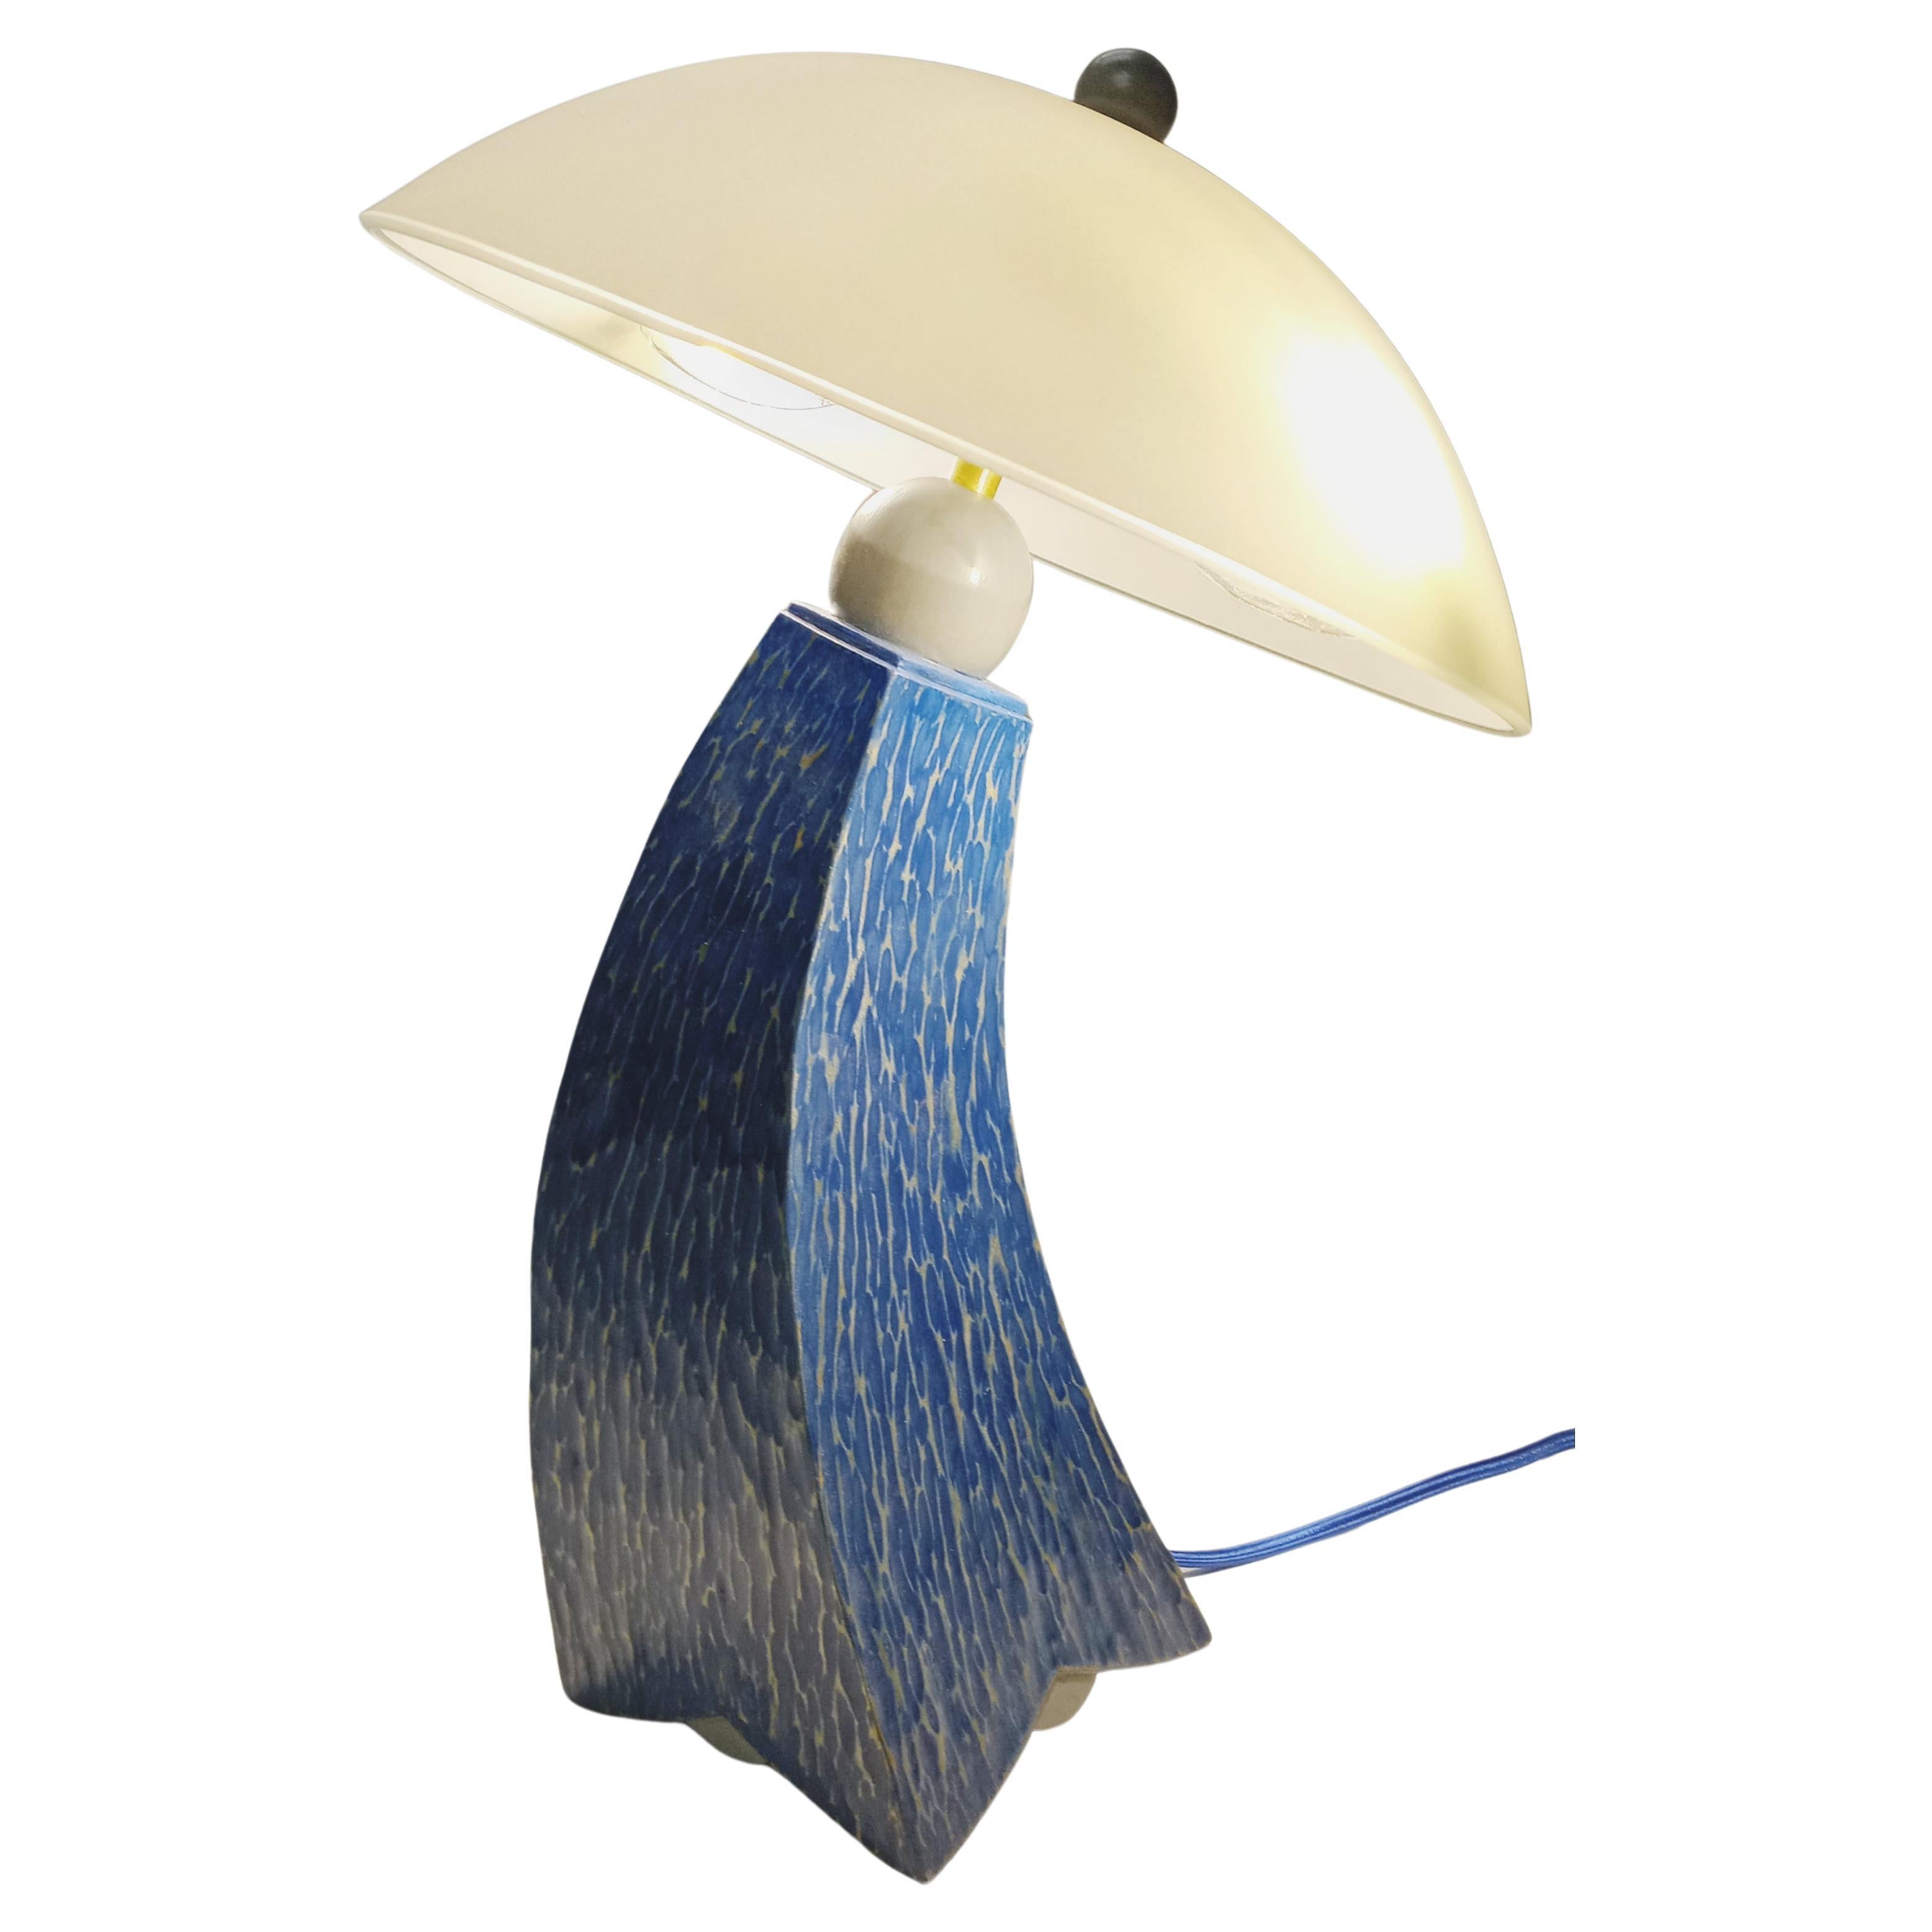 Table lamp min blue and grey textured milk painted jazz inspired design in stock For Sale